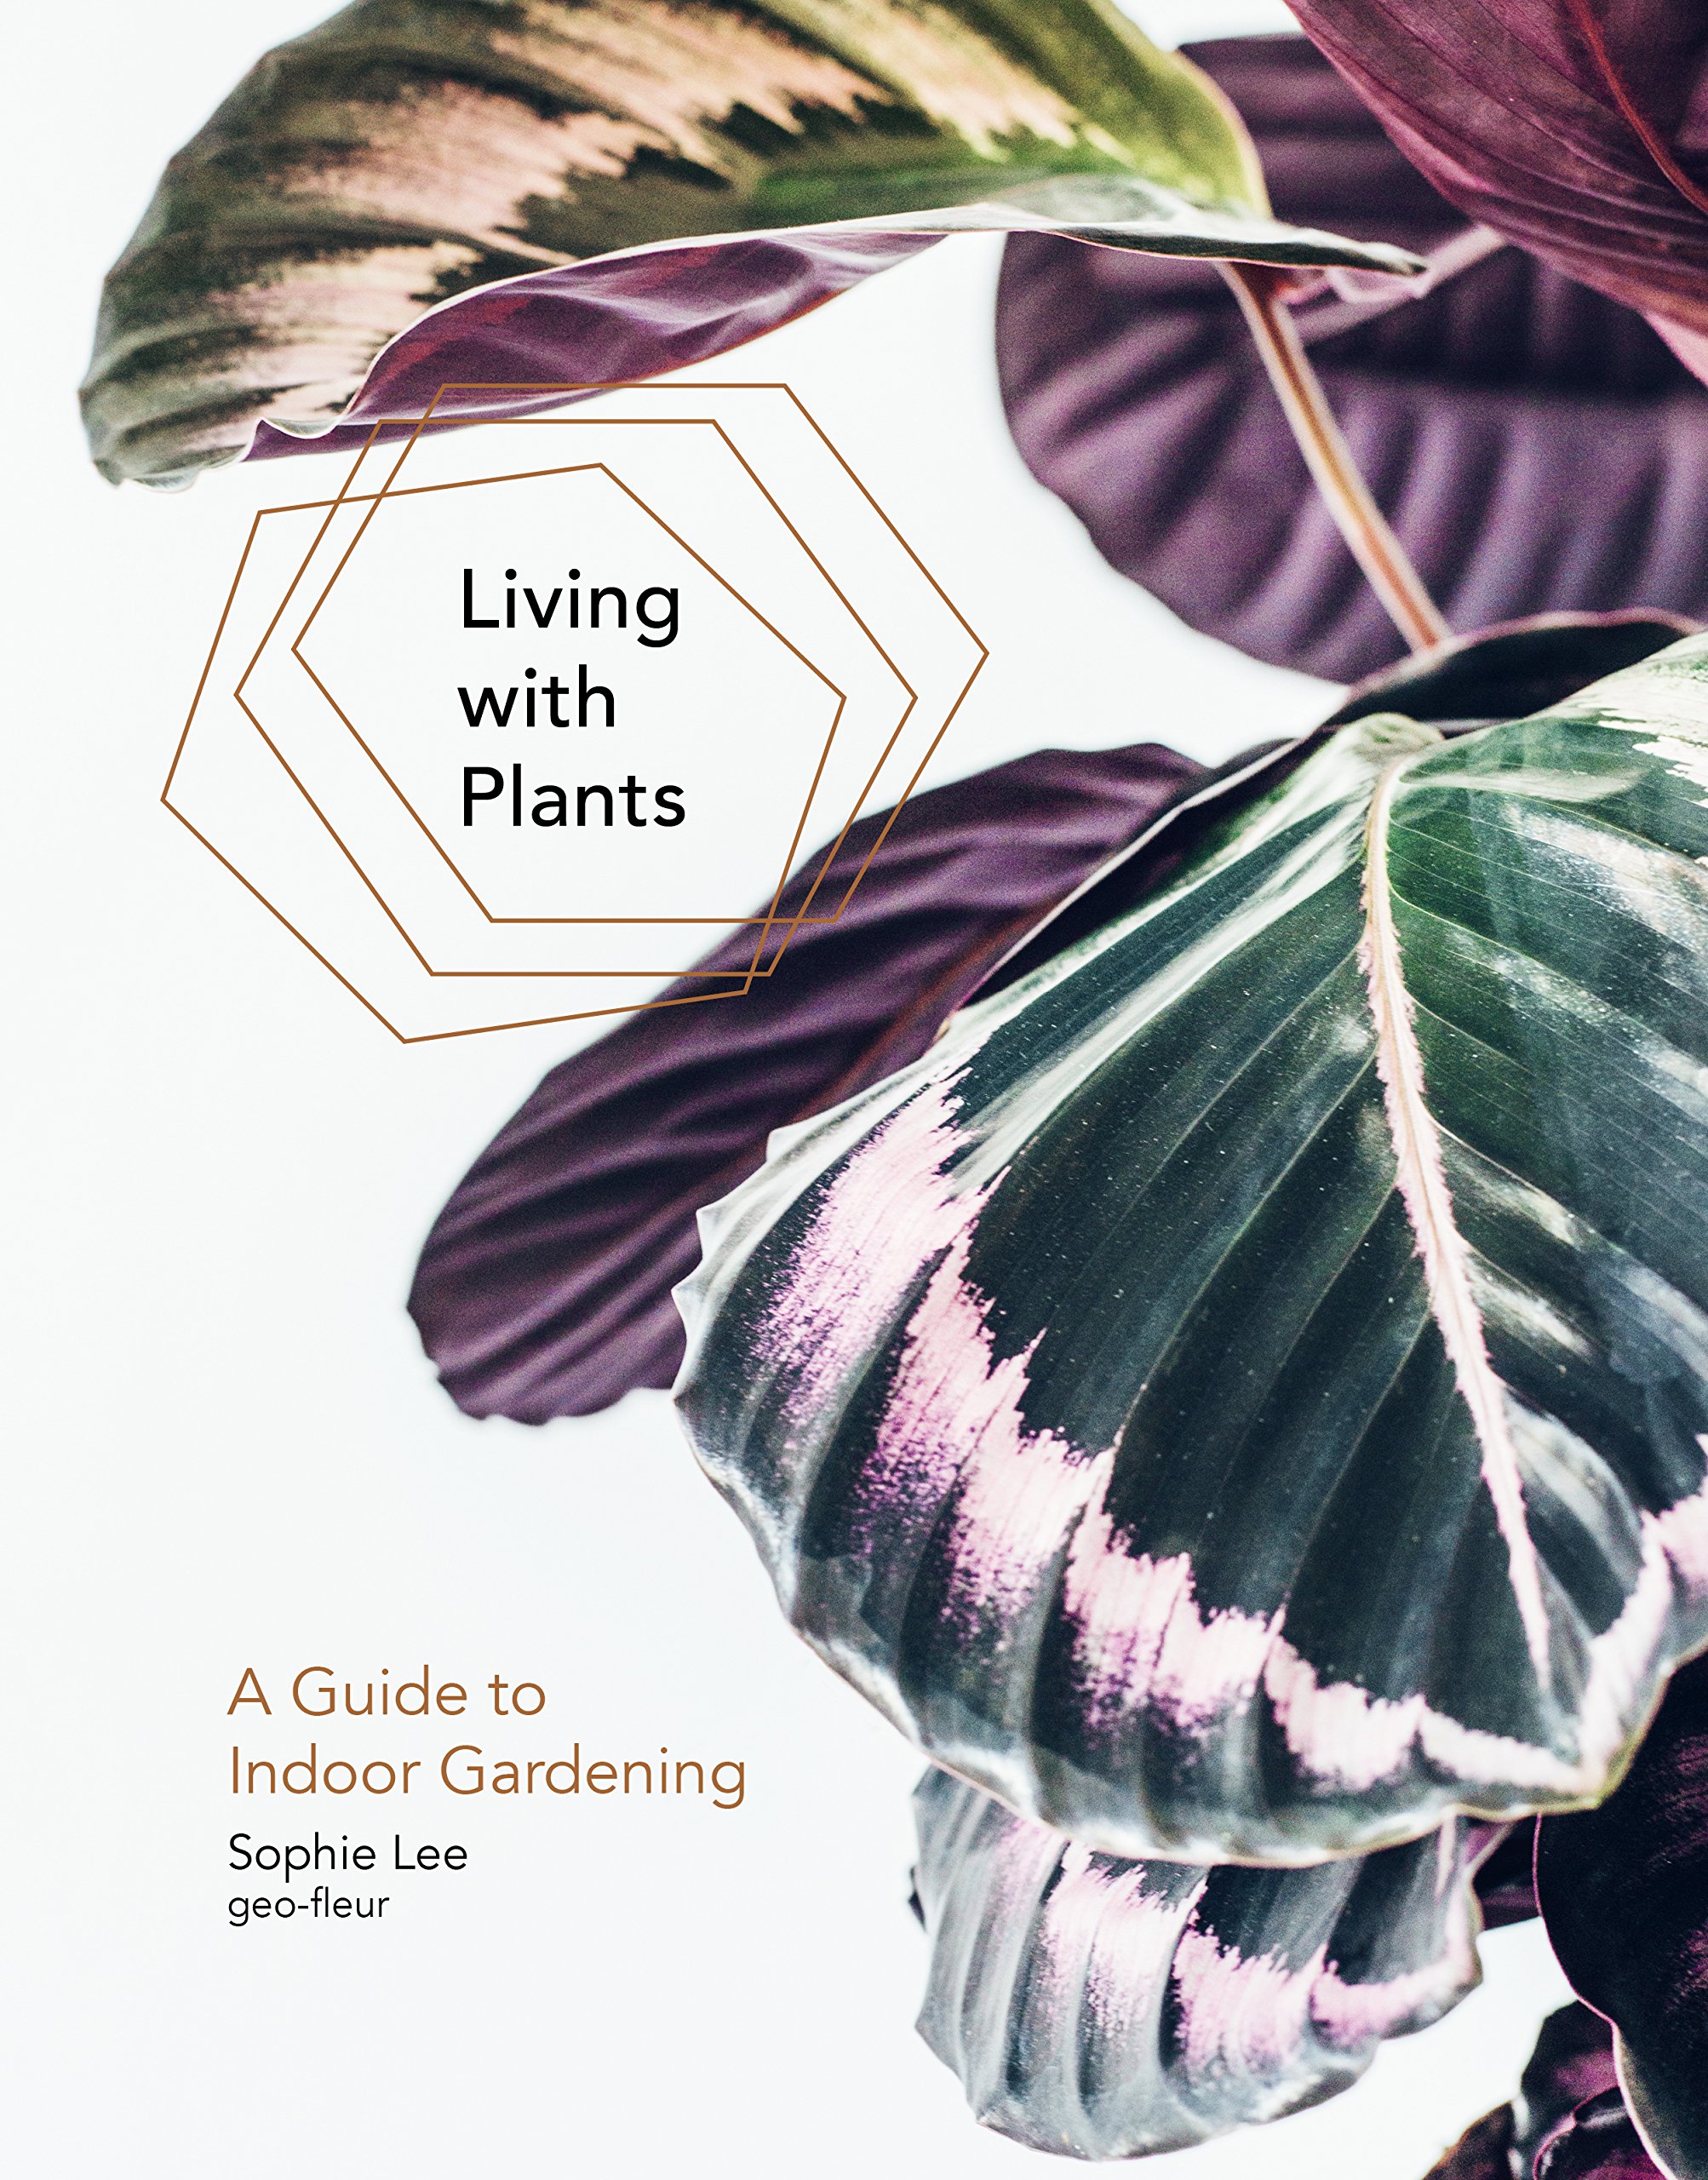 Copy of Living with Plants